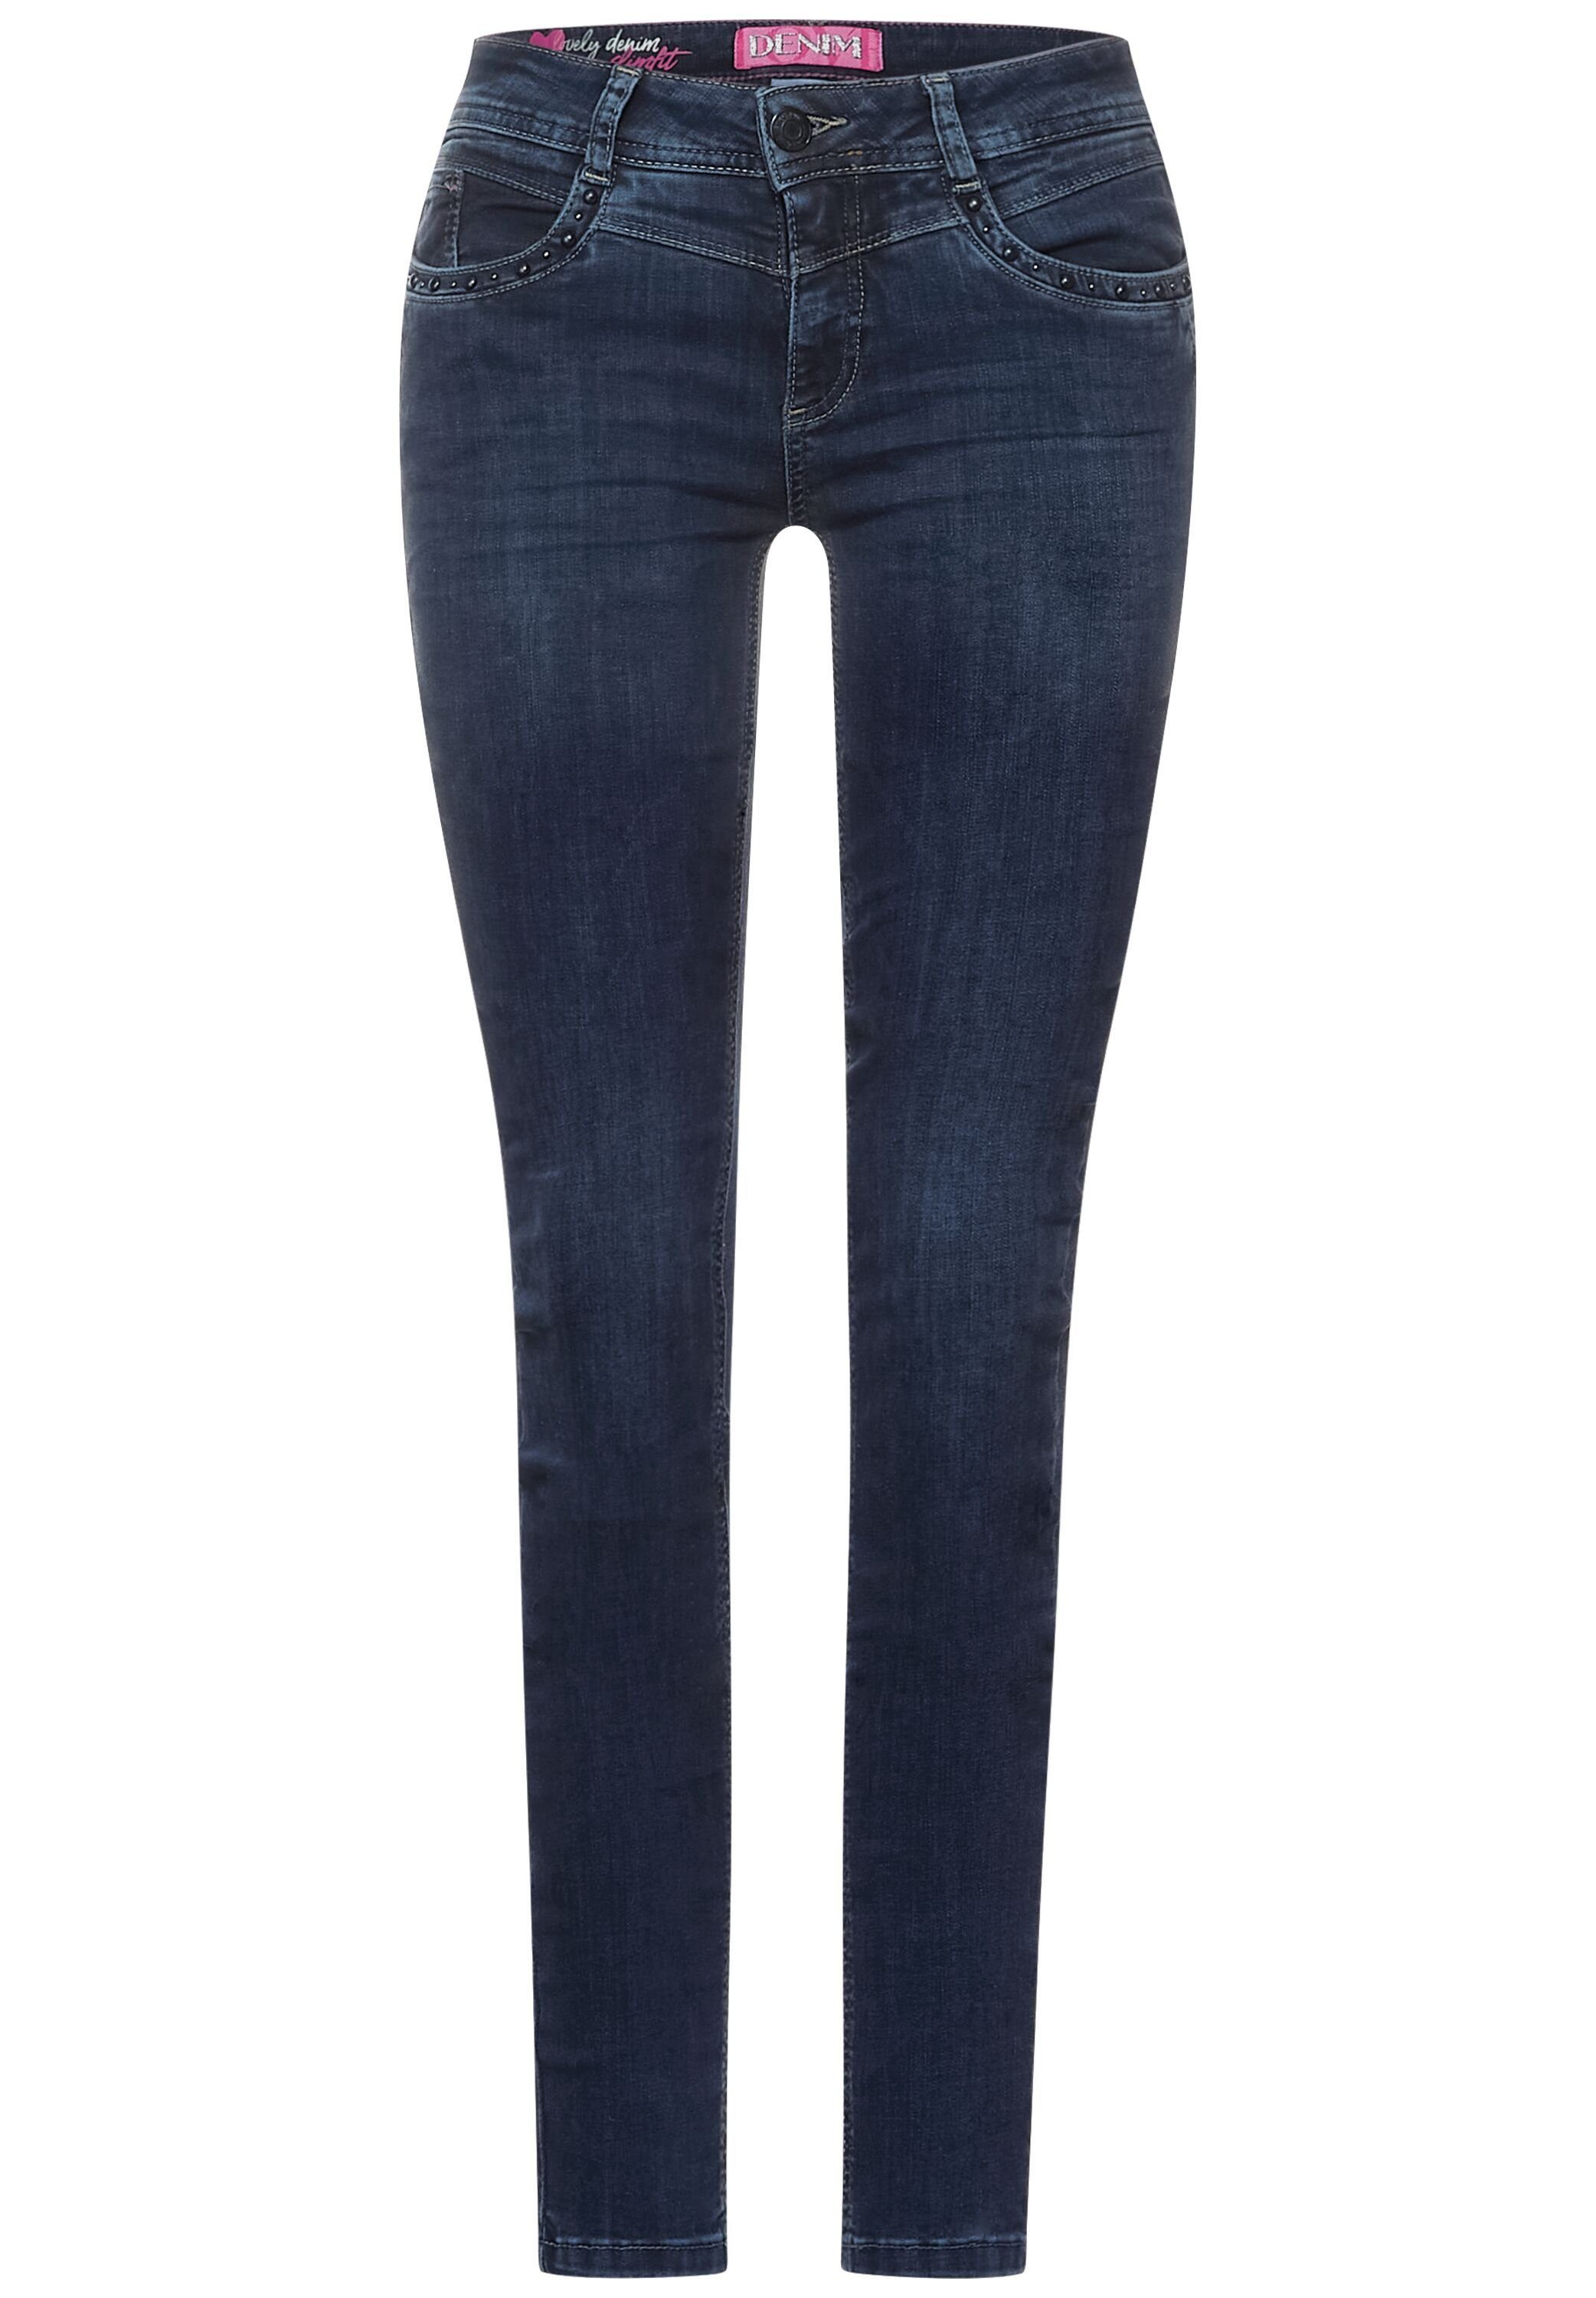 STREET ONE Bequeme Jeans